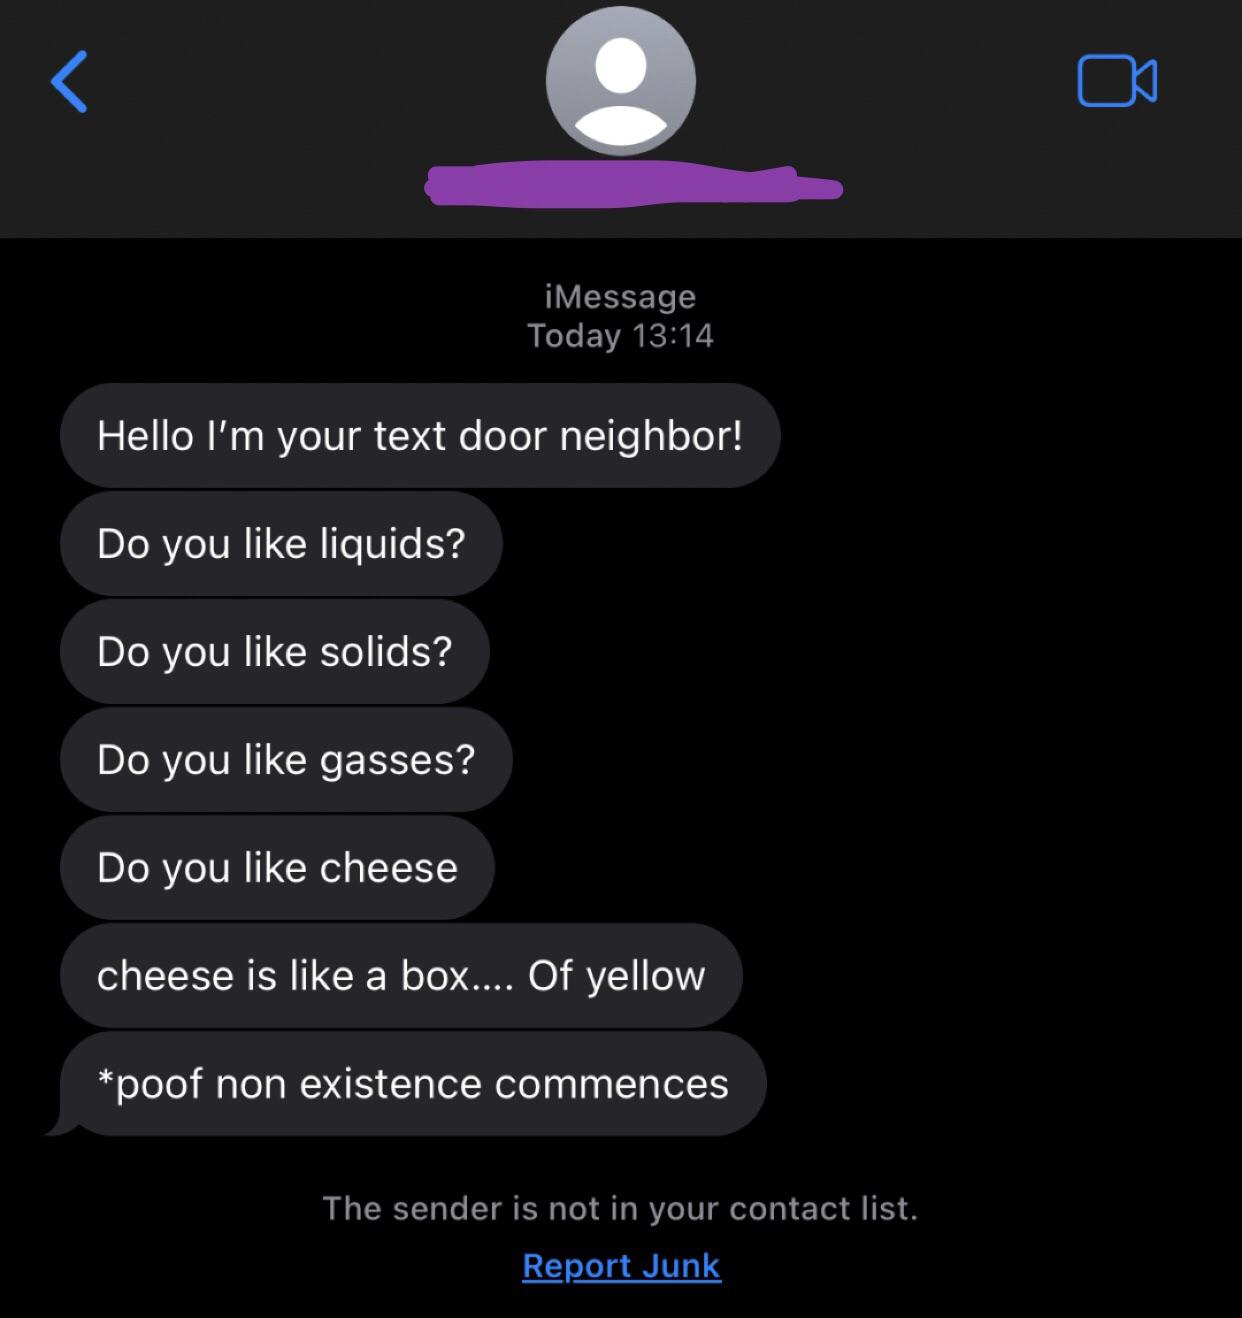 Cheese is like a box of yellow